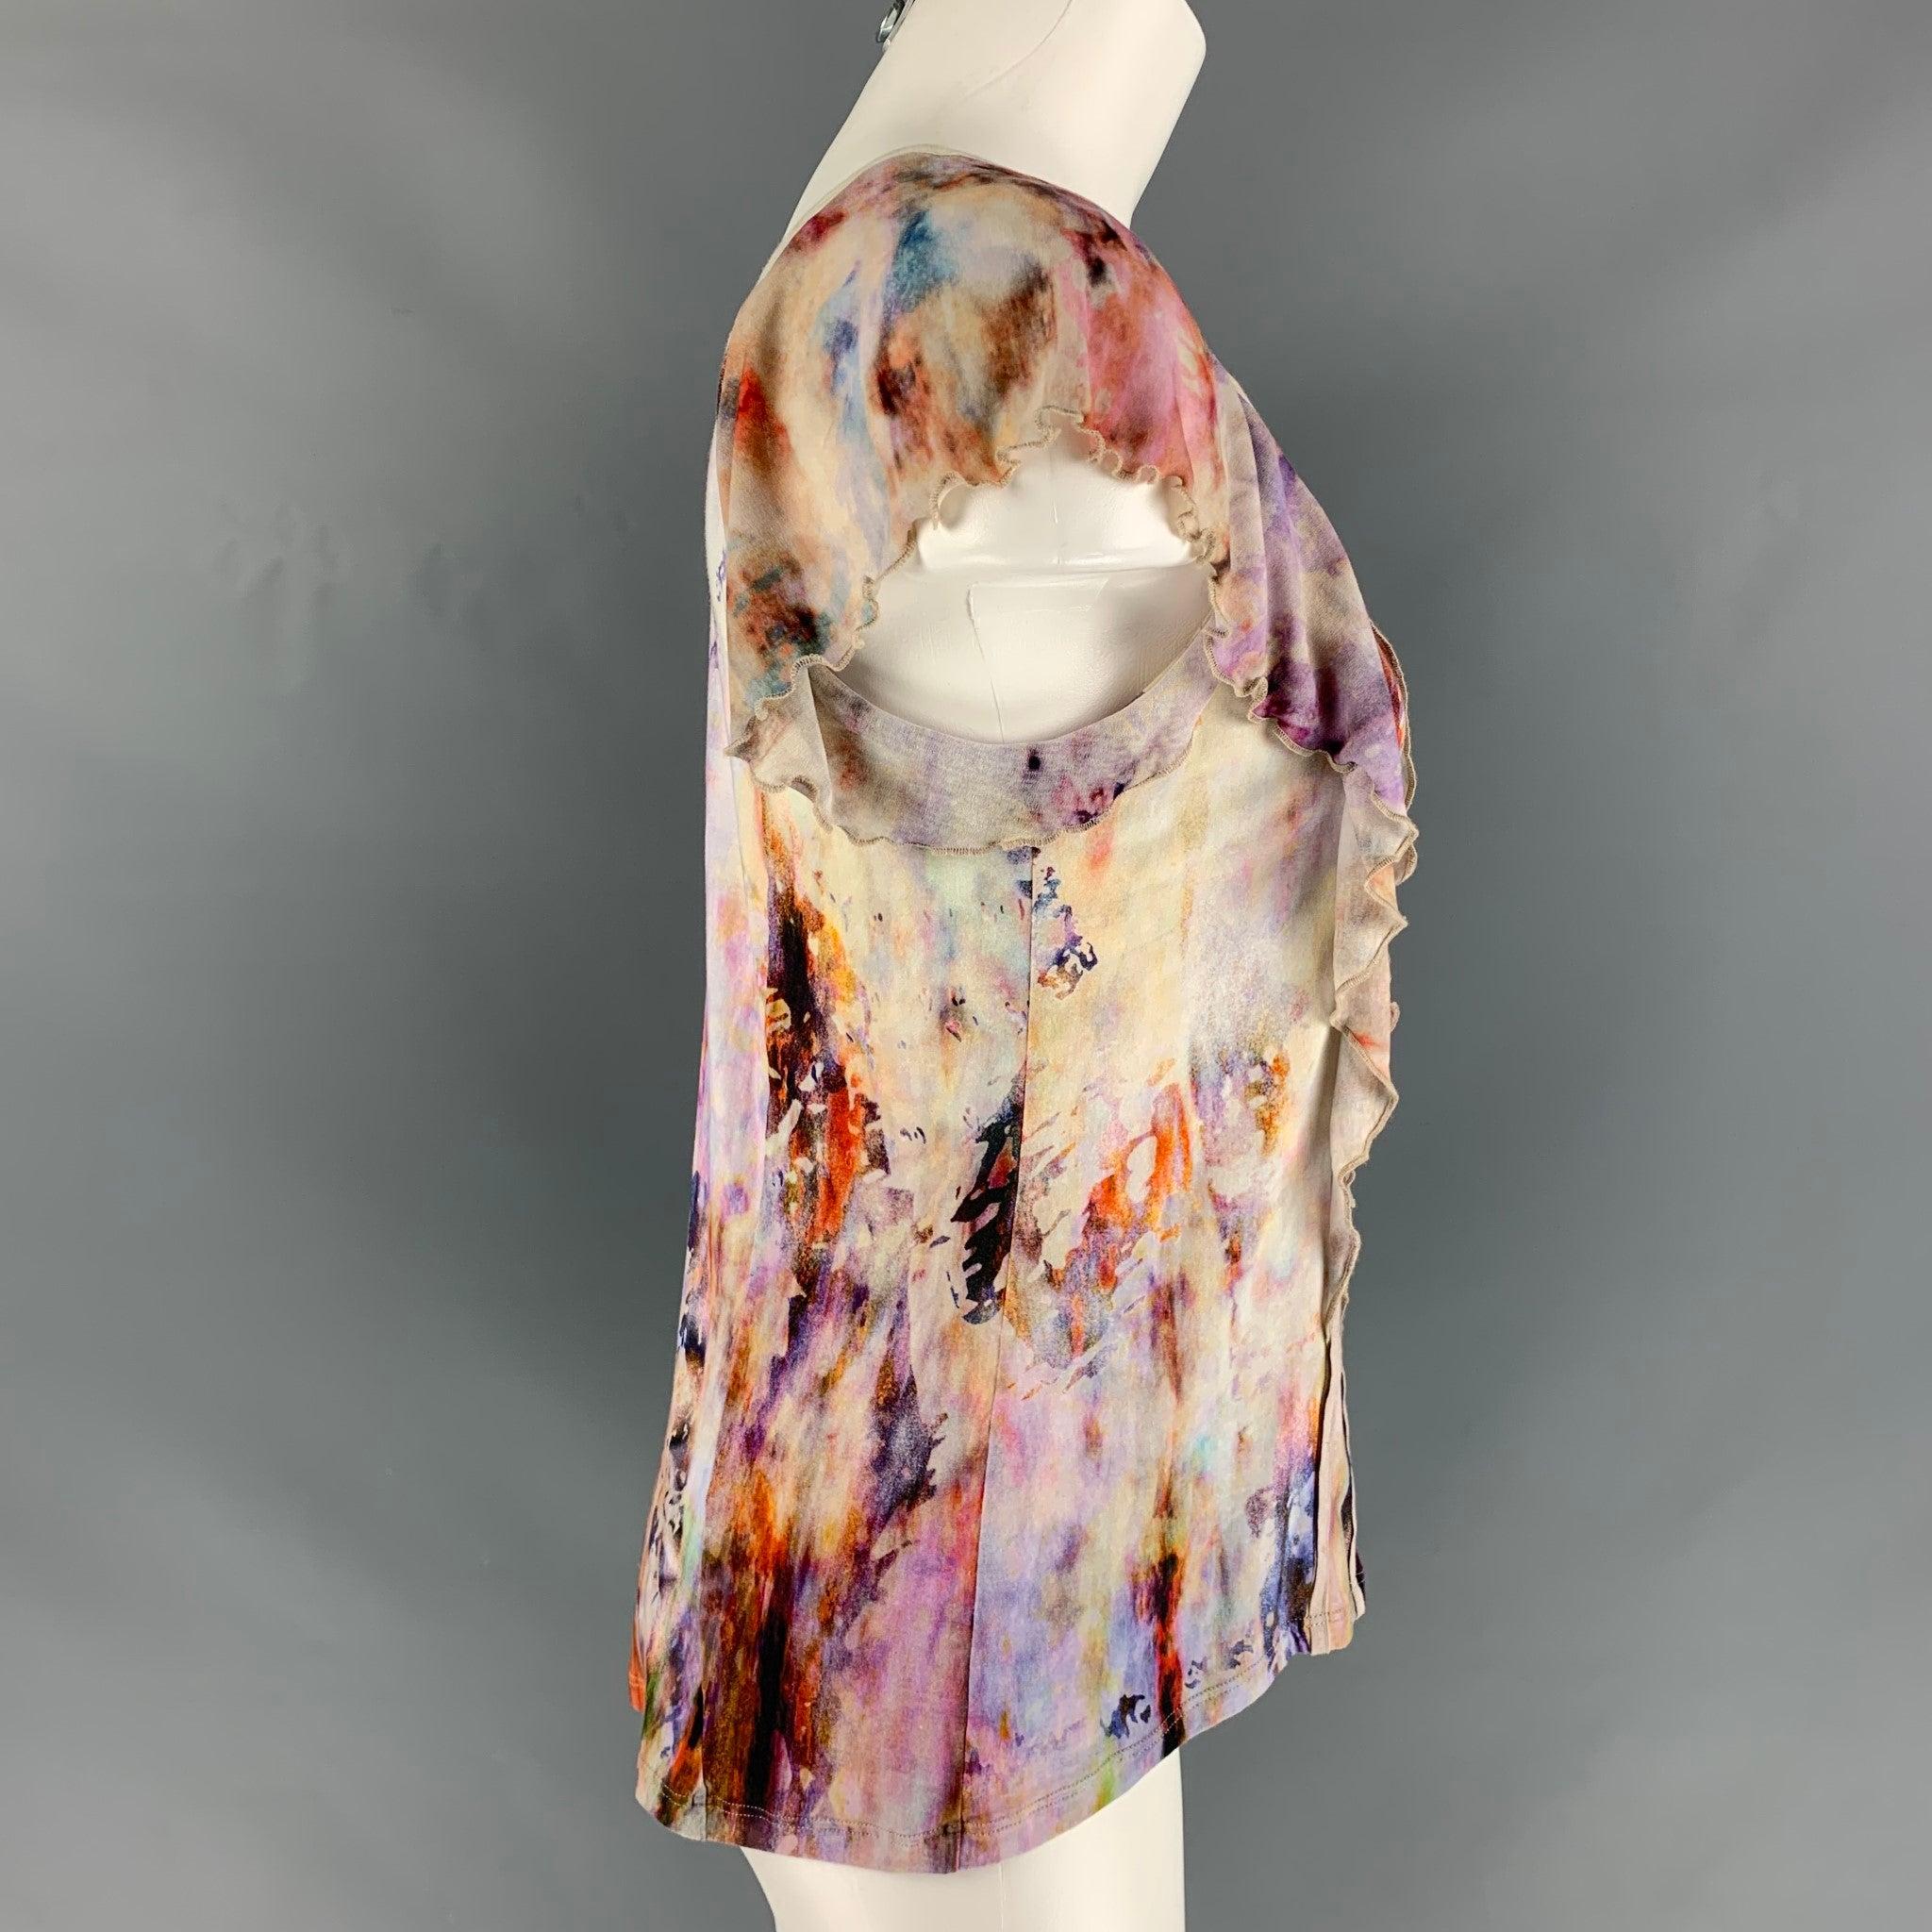 NINA RICCI by OLIVIER THEYSKENS blouse comes in pink multi colour tie dye print cotton jersey featuring a cap sleeve, scoop neck and ruffle detail at front. Made in France.Very Good
Pre-Owned Condition. 

Marked:   40 IT 

Measurements: 
 
Shoulder: